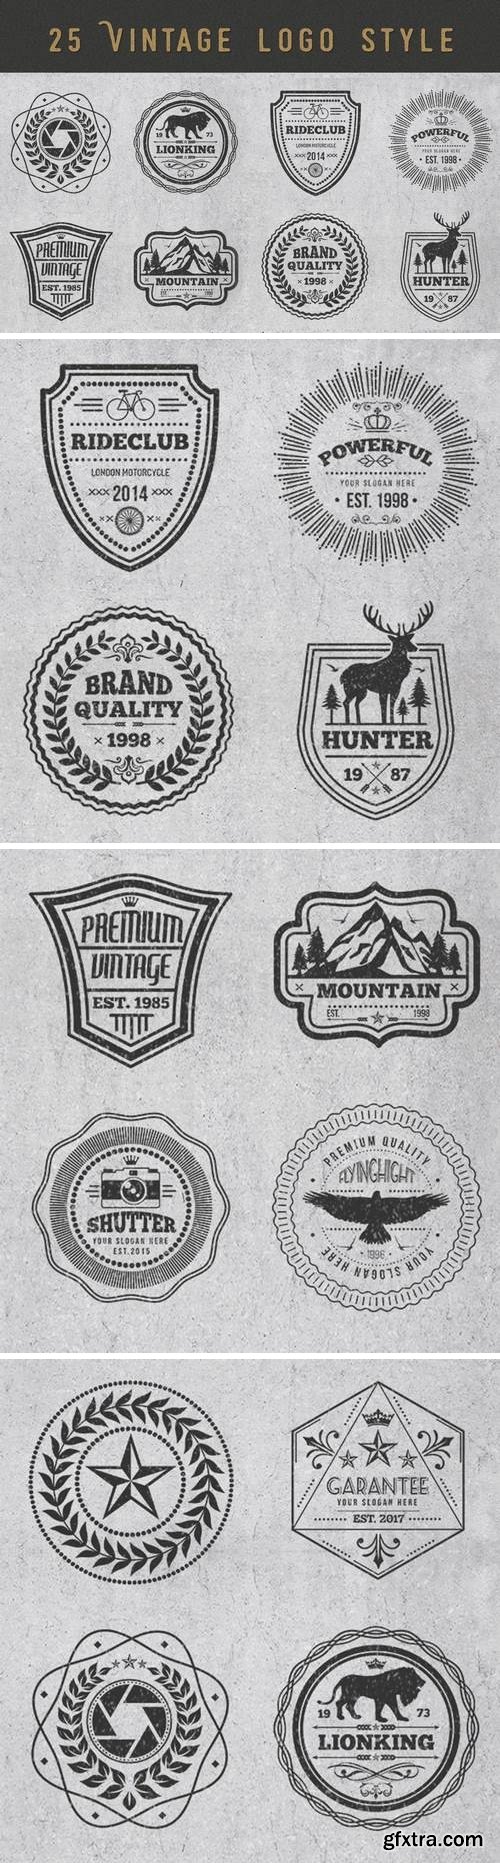 Logos and Badges Vintage Style